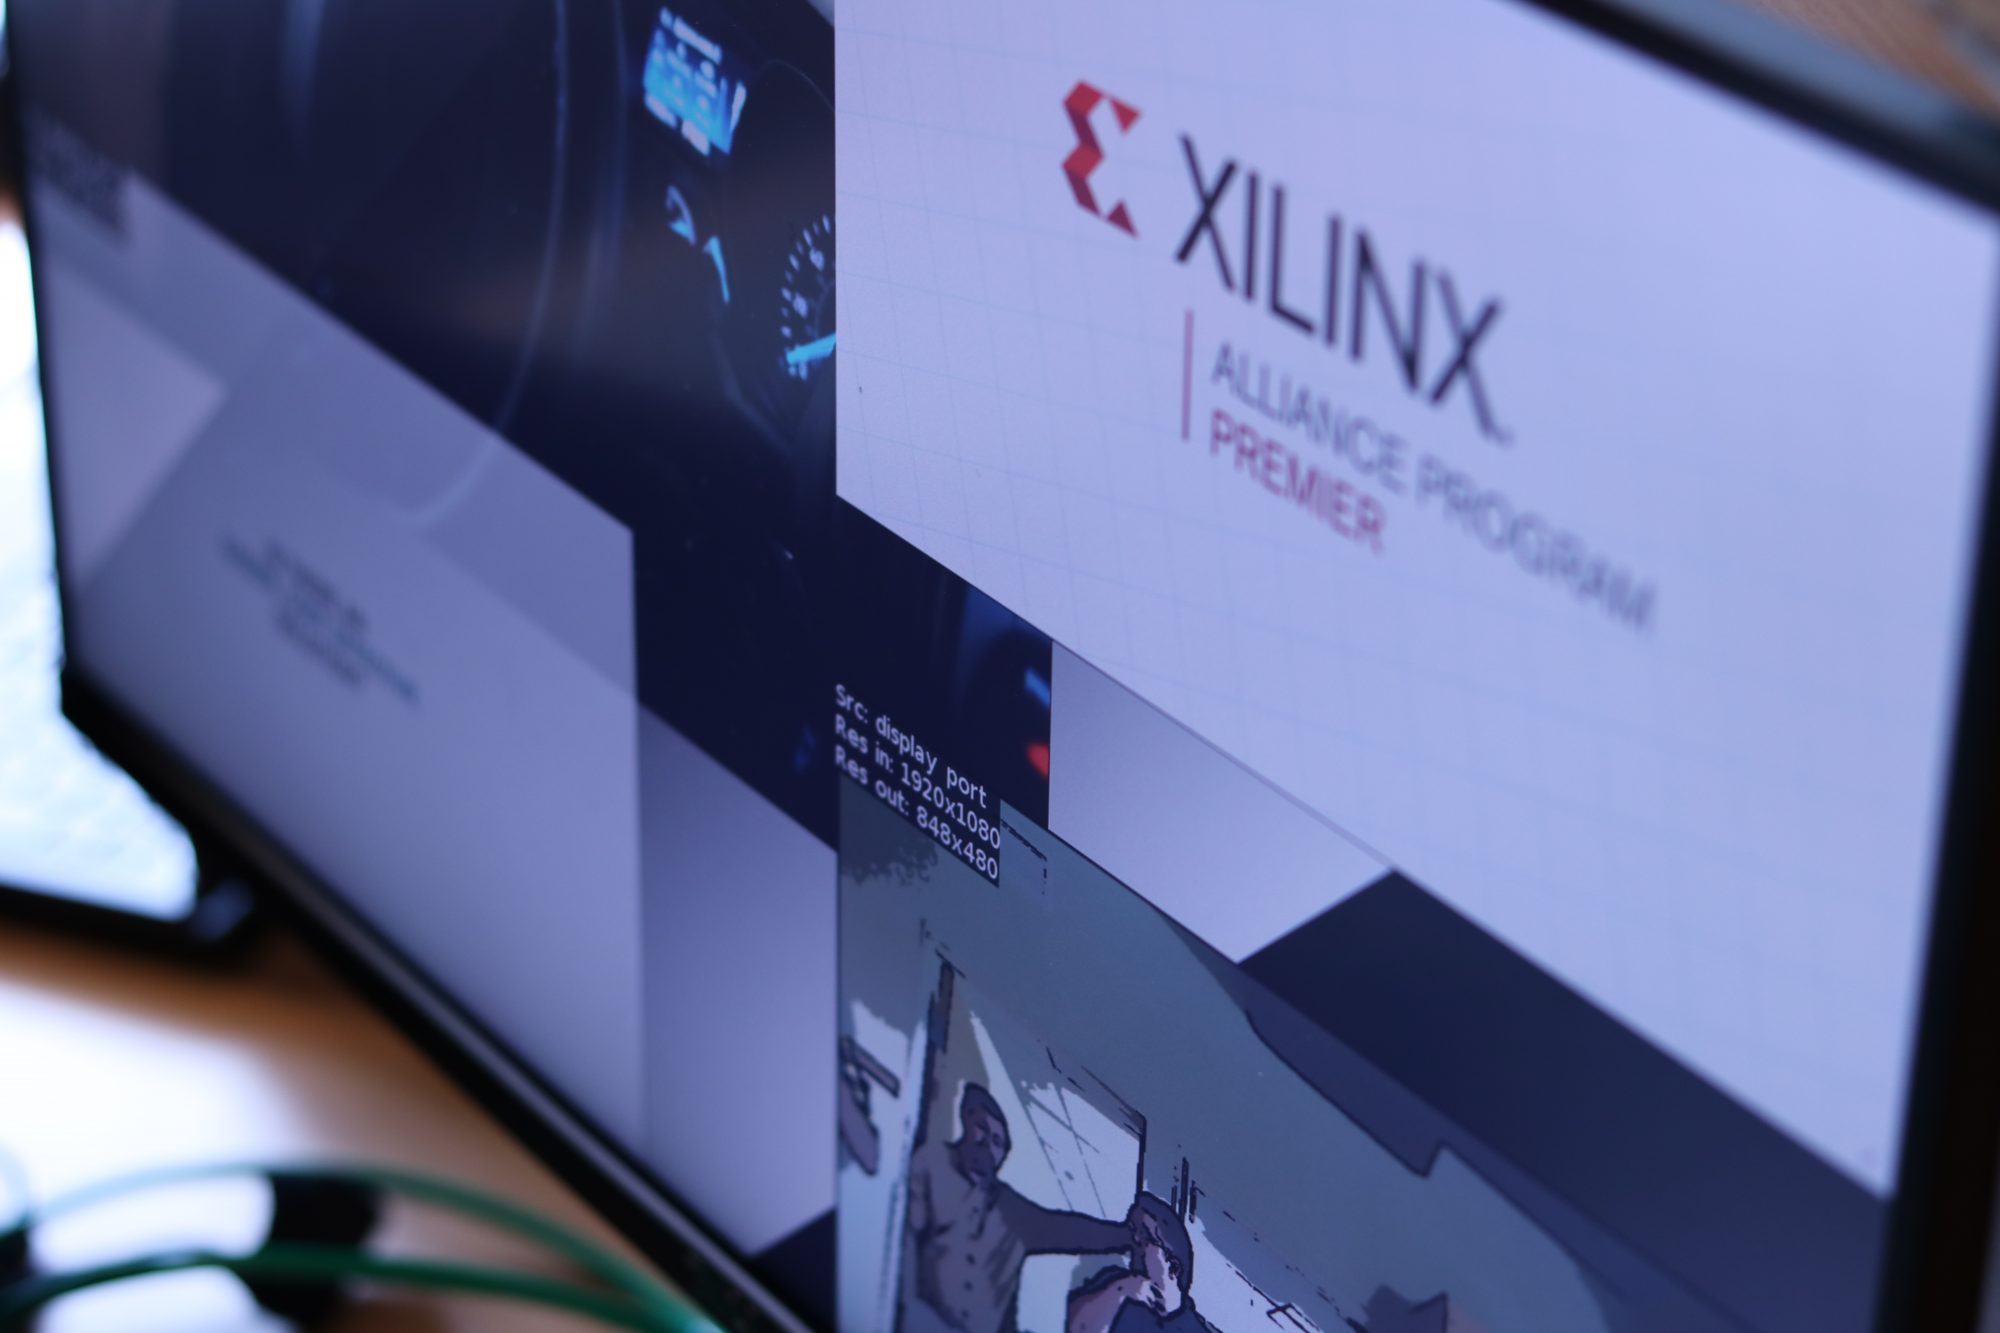 The Xilinx Zynq UltraScale+ MPSoC enables this multi-stream video demonstration.